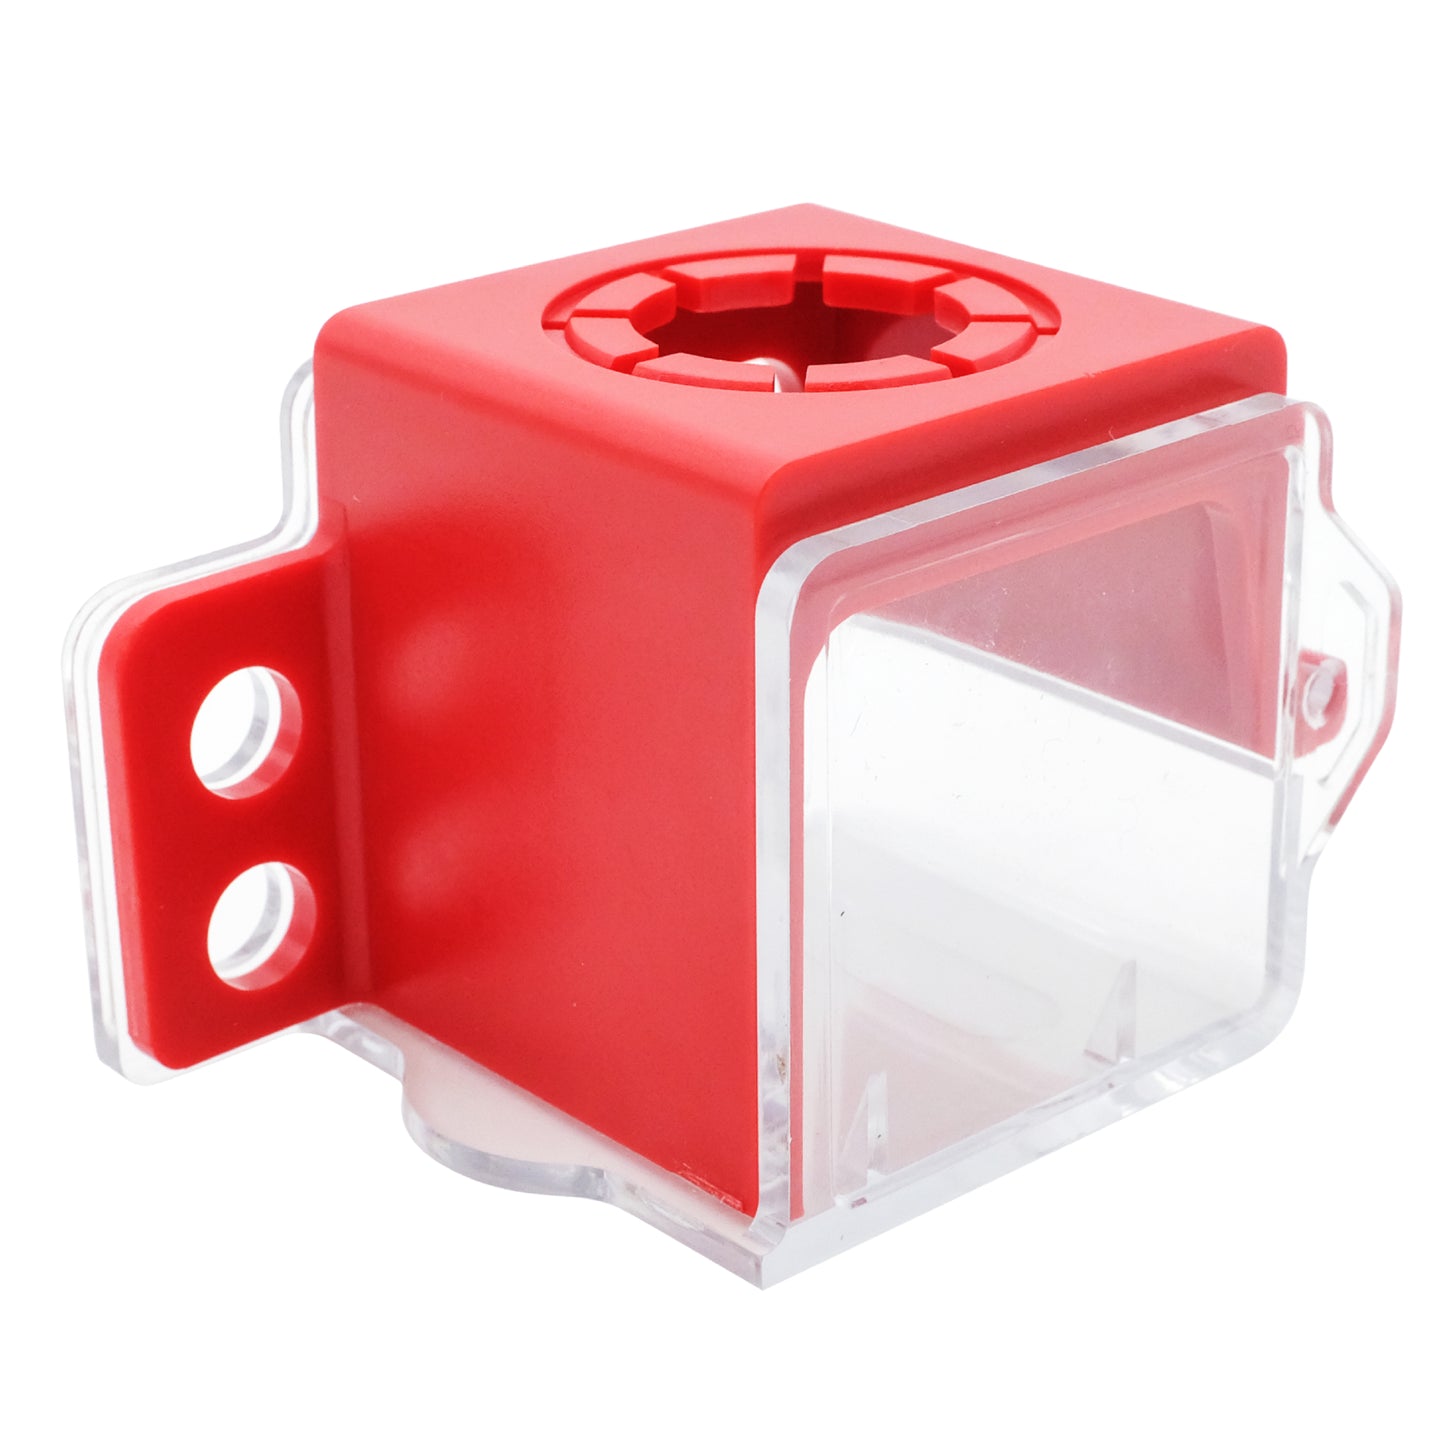 eye-level view of a closed box type red push button lockout with transparent cover